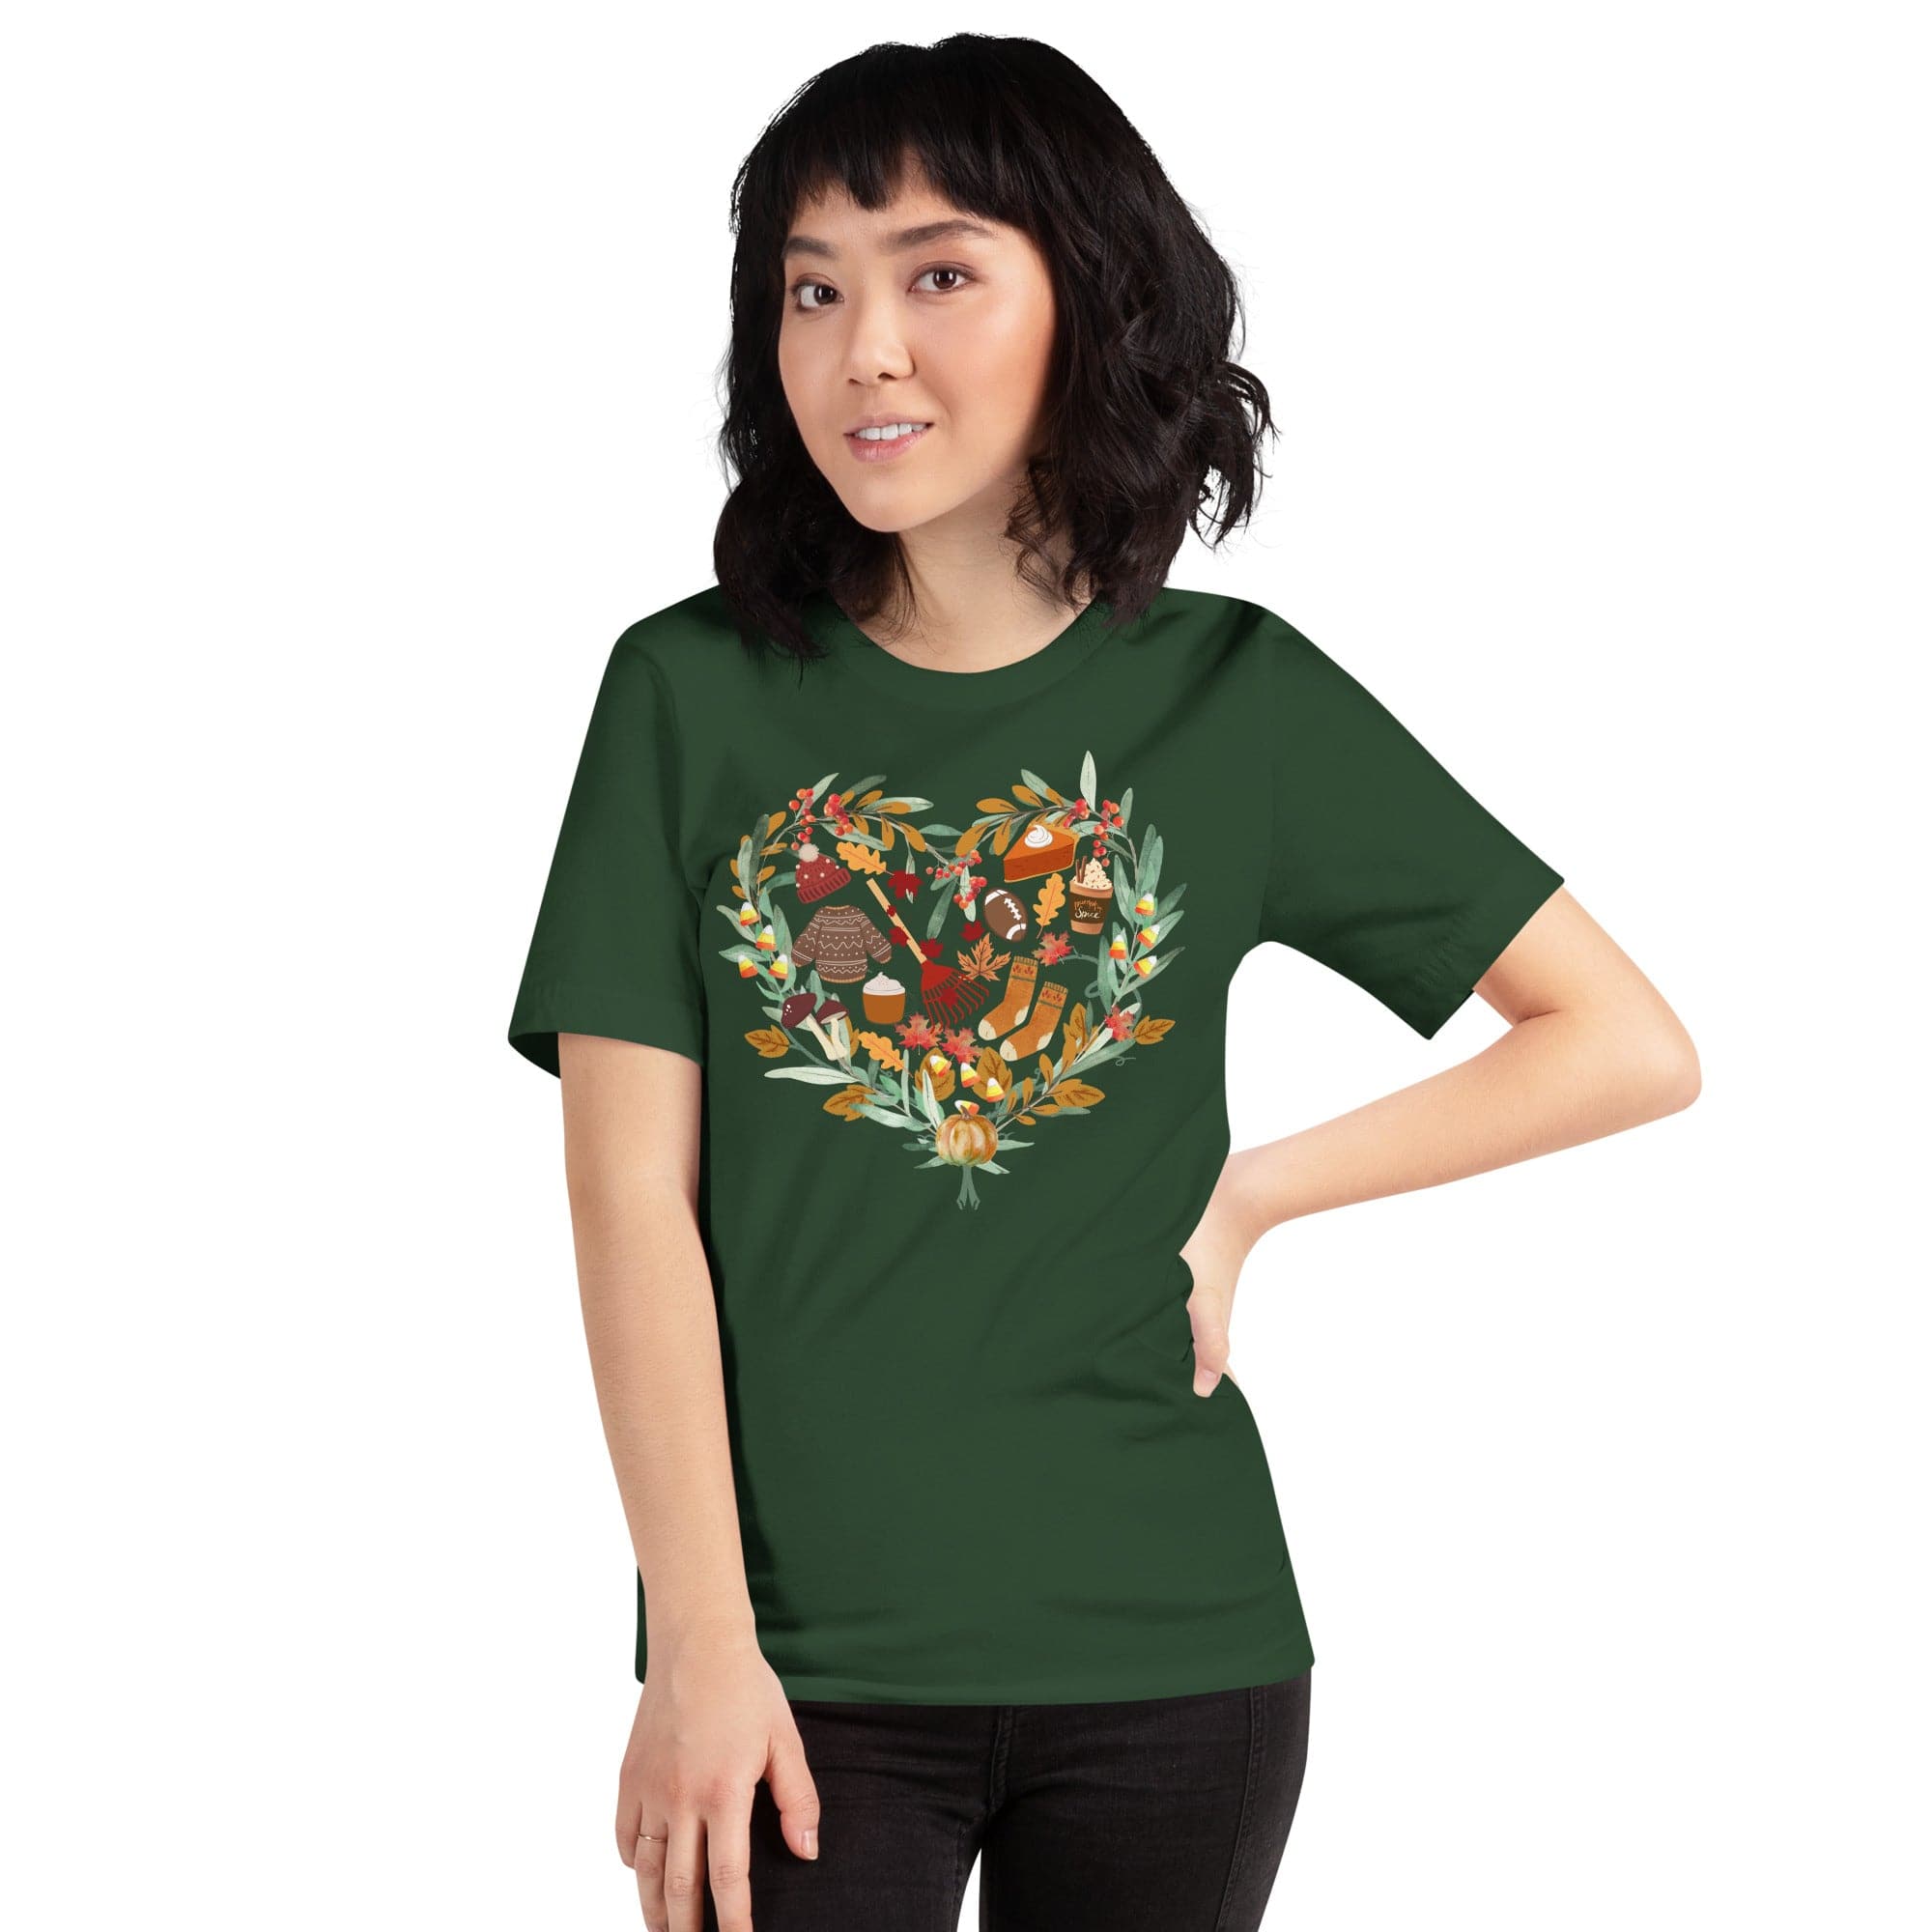 Spruced Roost T-Shirts Forest / S Autumn Medley T-Shirt Crew Neck - XS-3XL